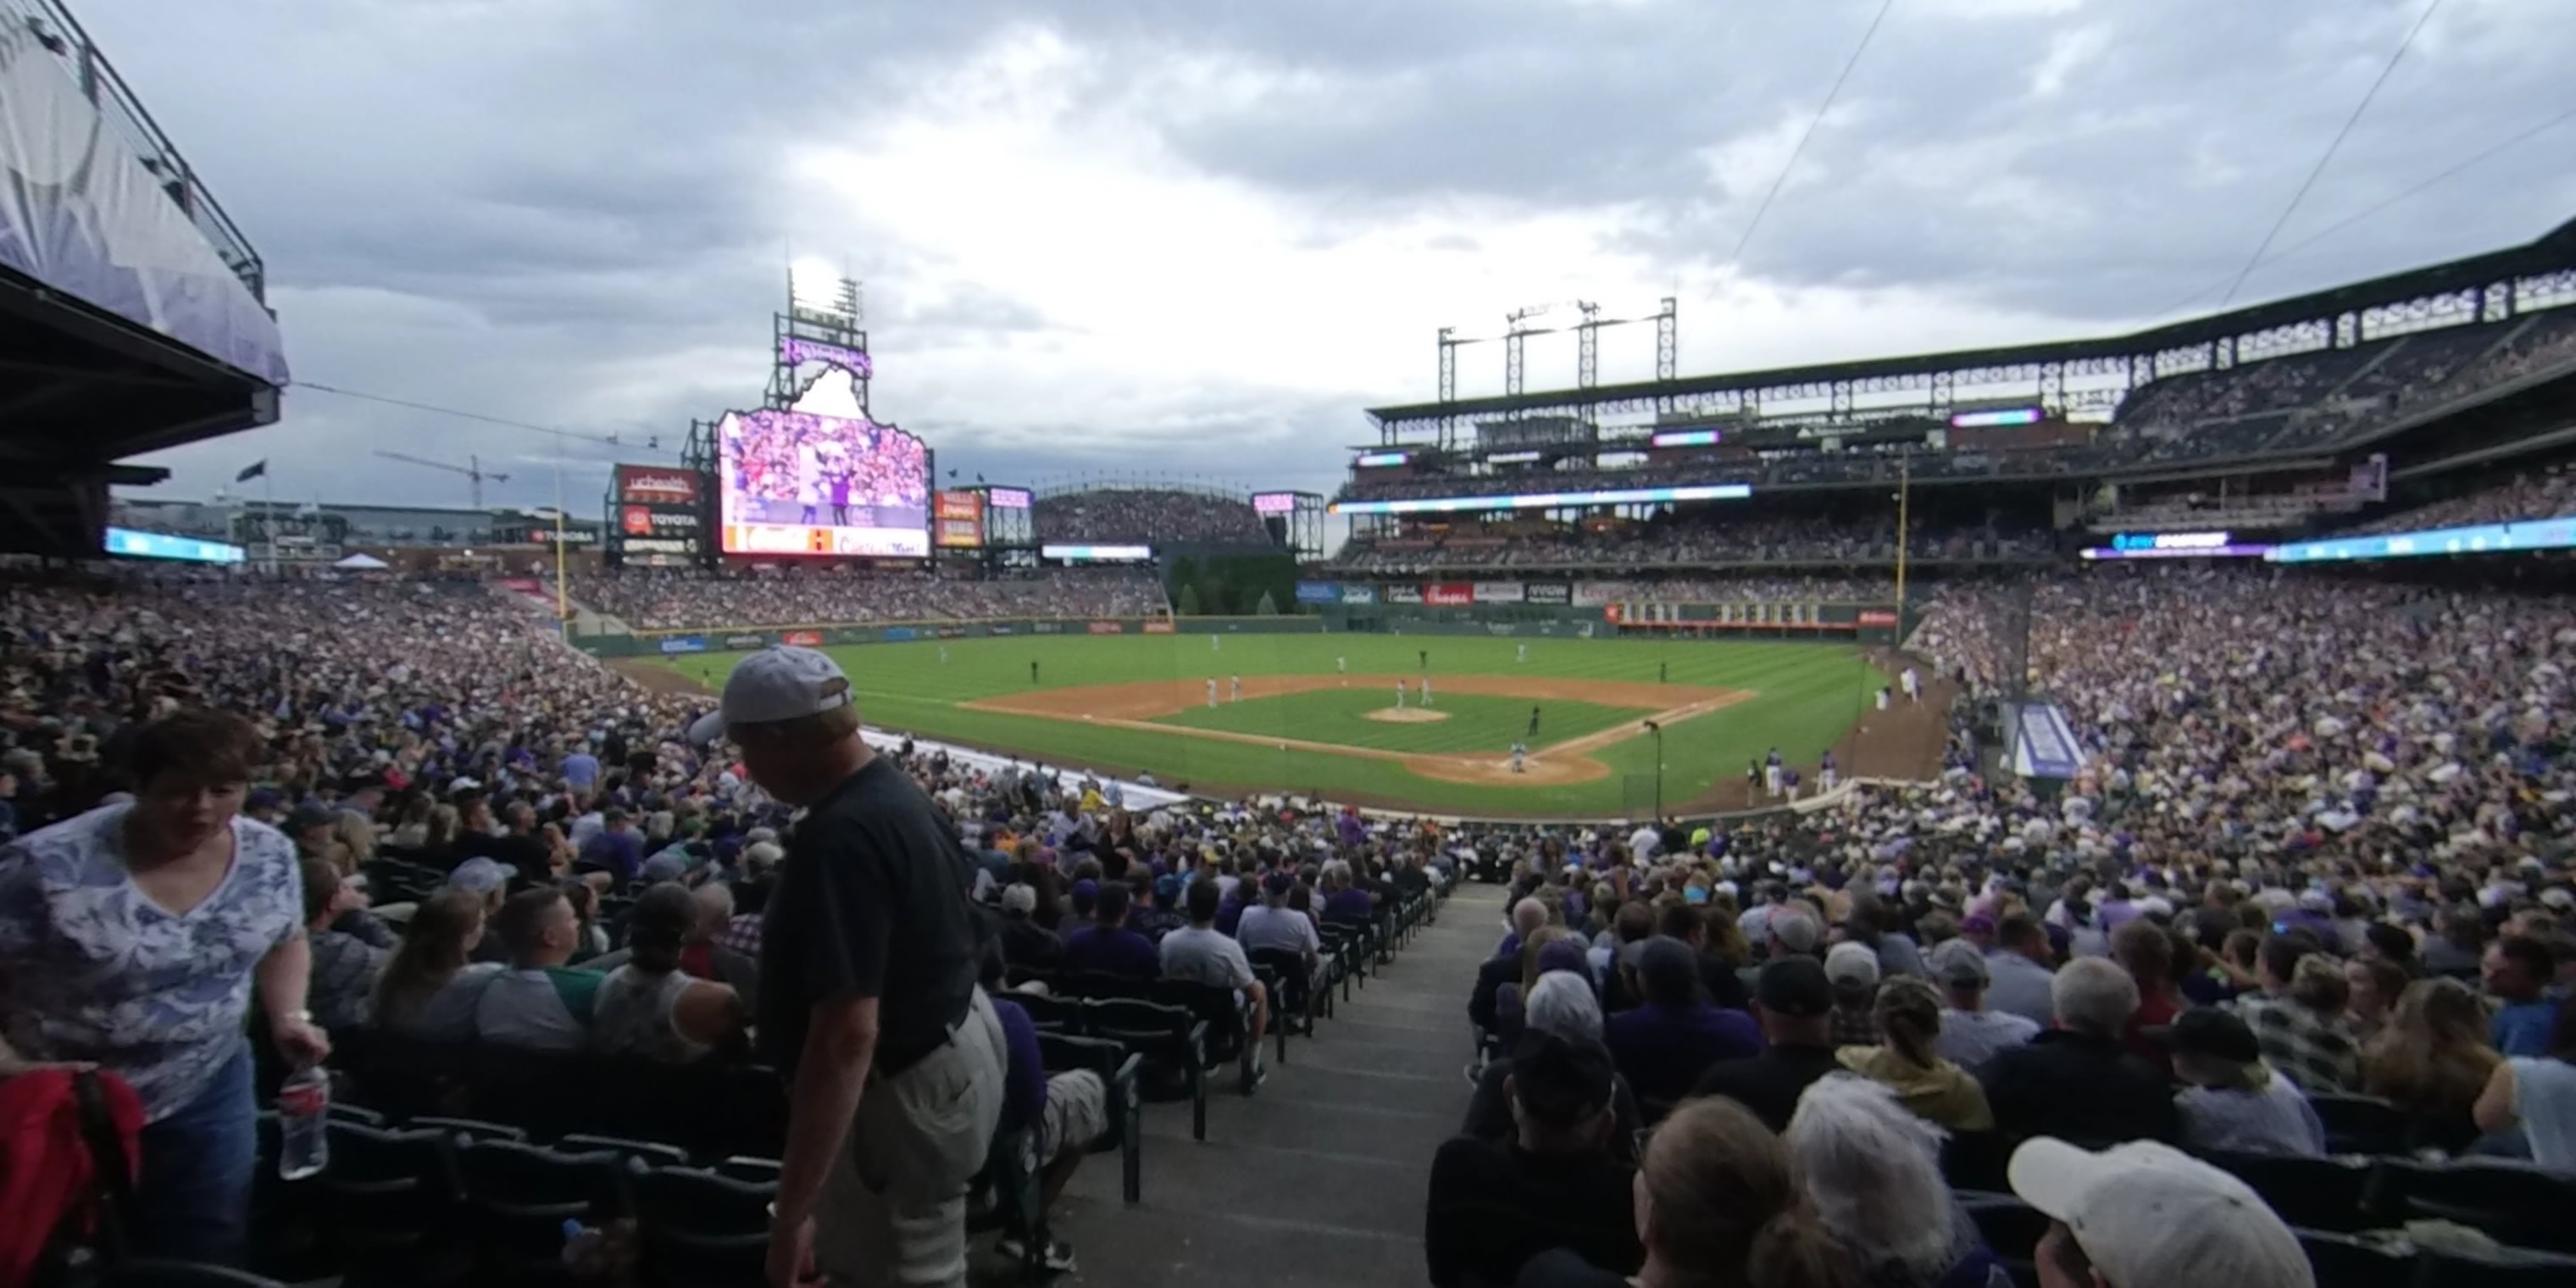 section 132 panoramic seat view  - coors field